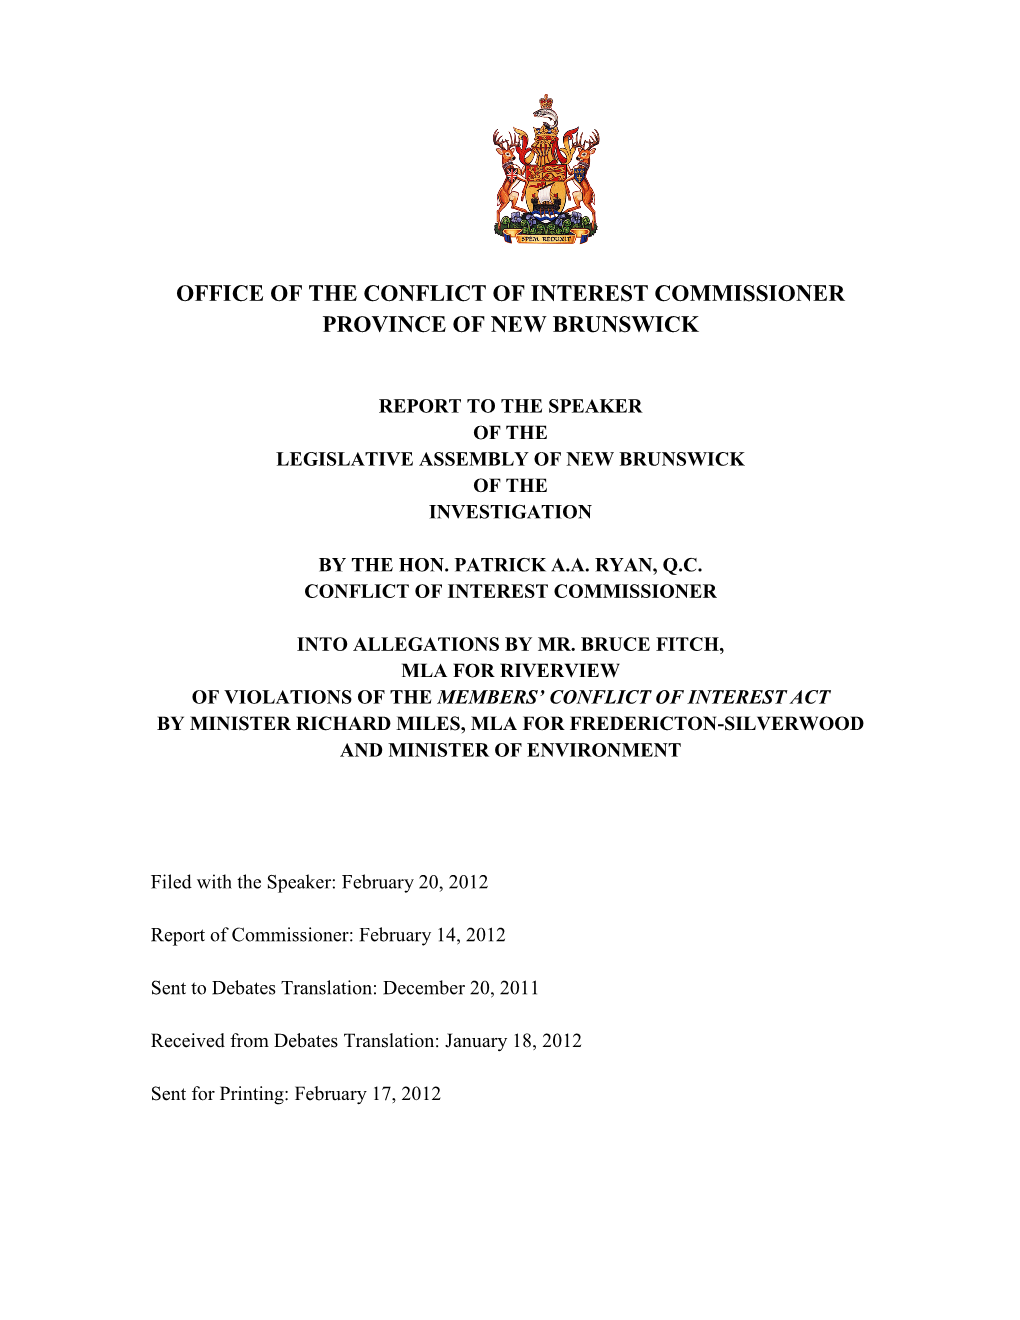 Office of the Conflict of Interest Commissioner Province of New Brunswick